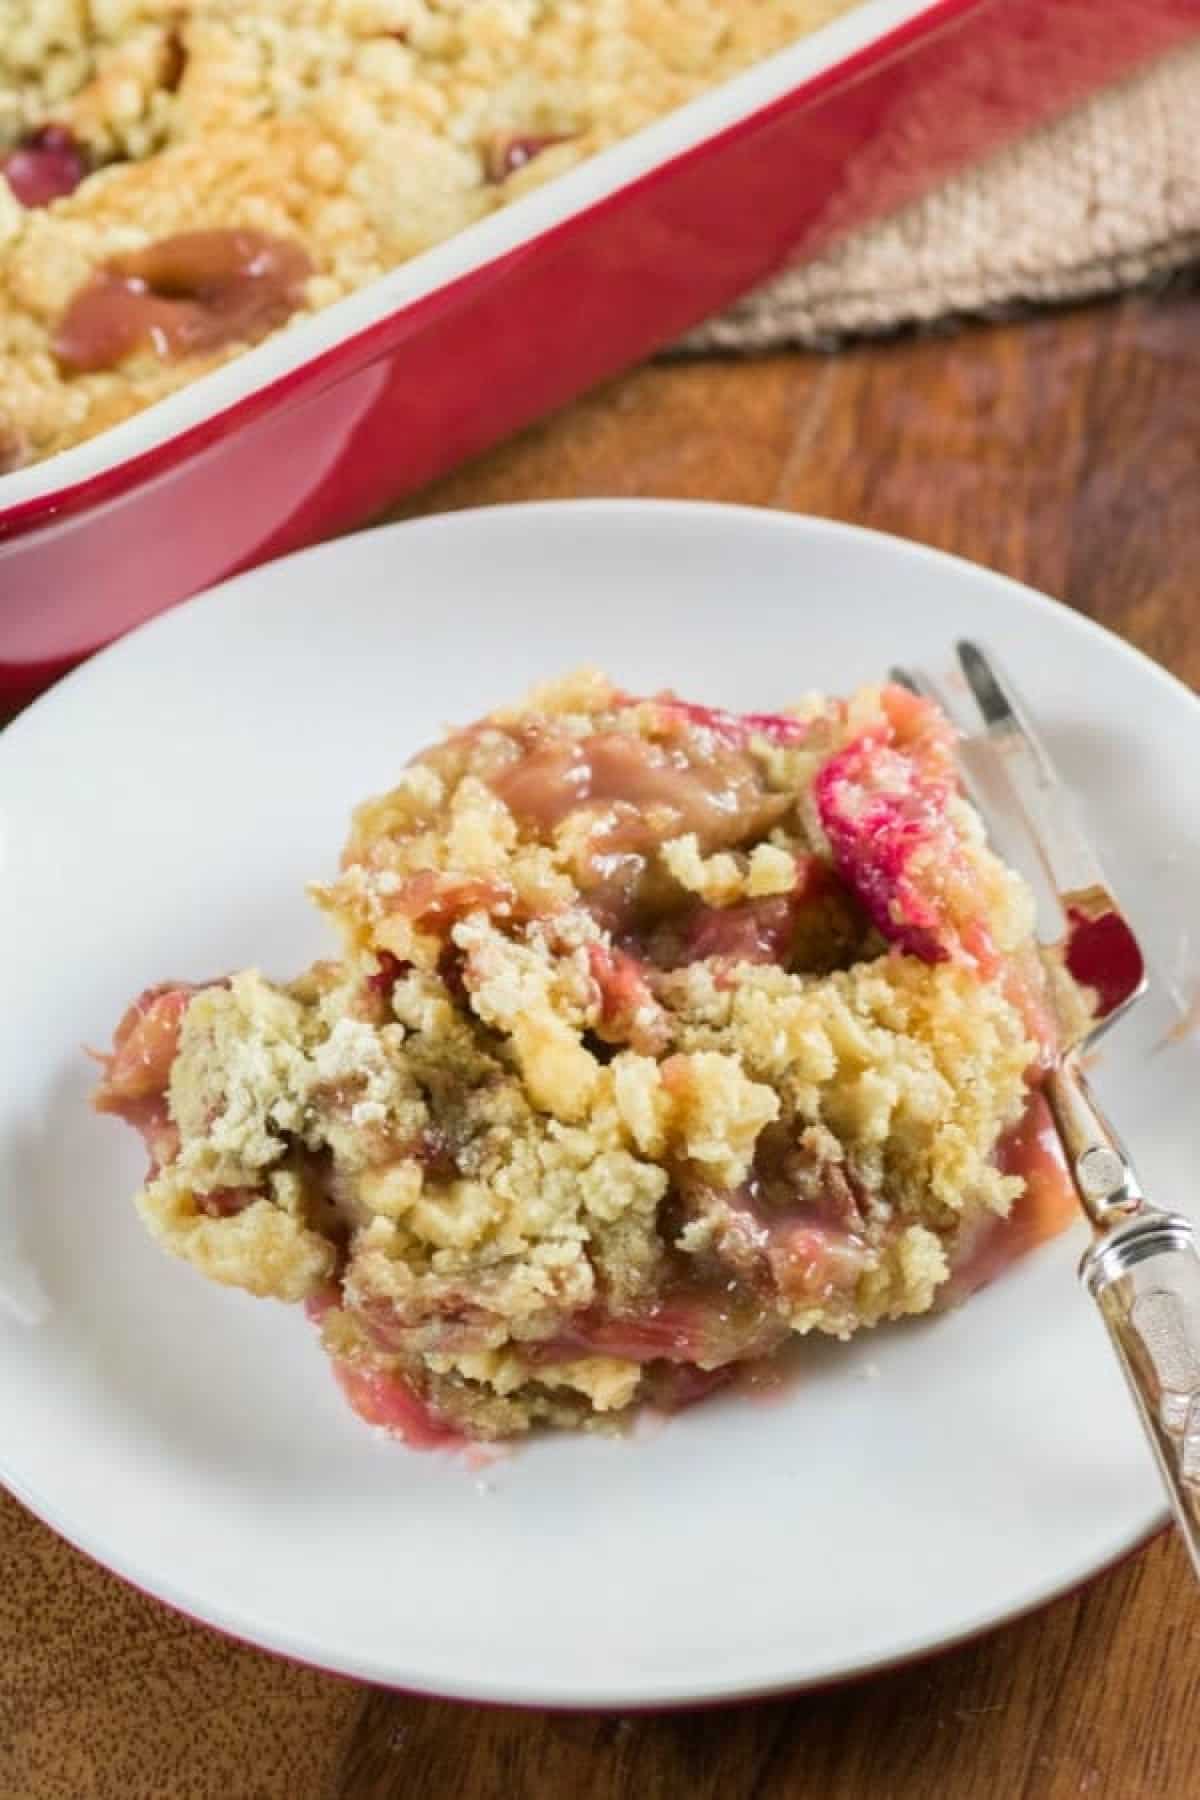 Rhubarb Dump Cake served on a plate with a fork.